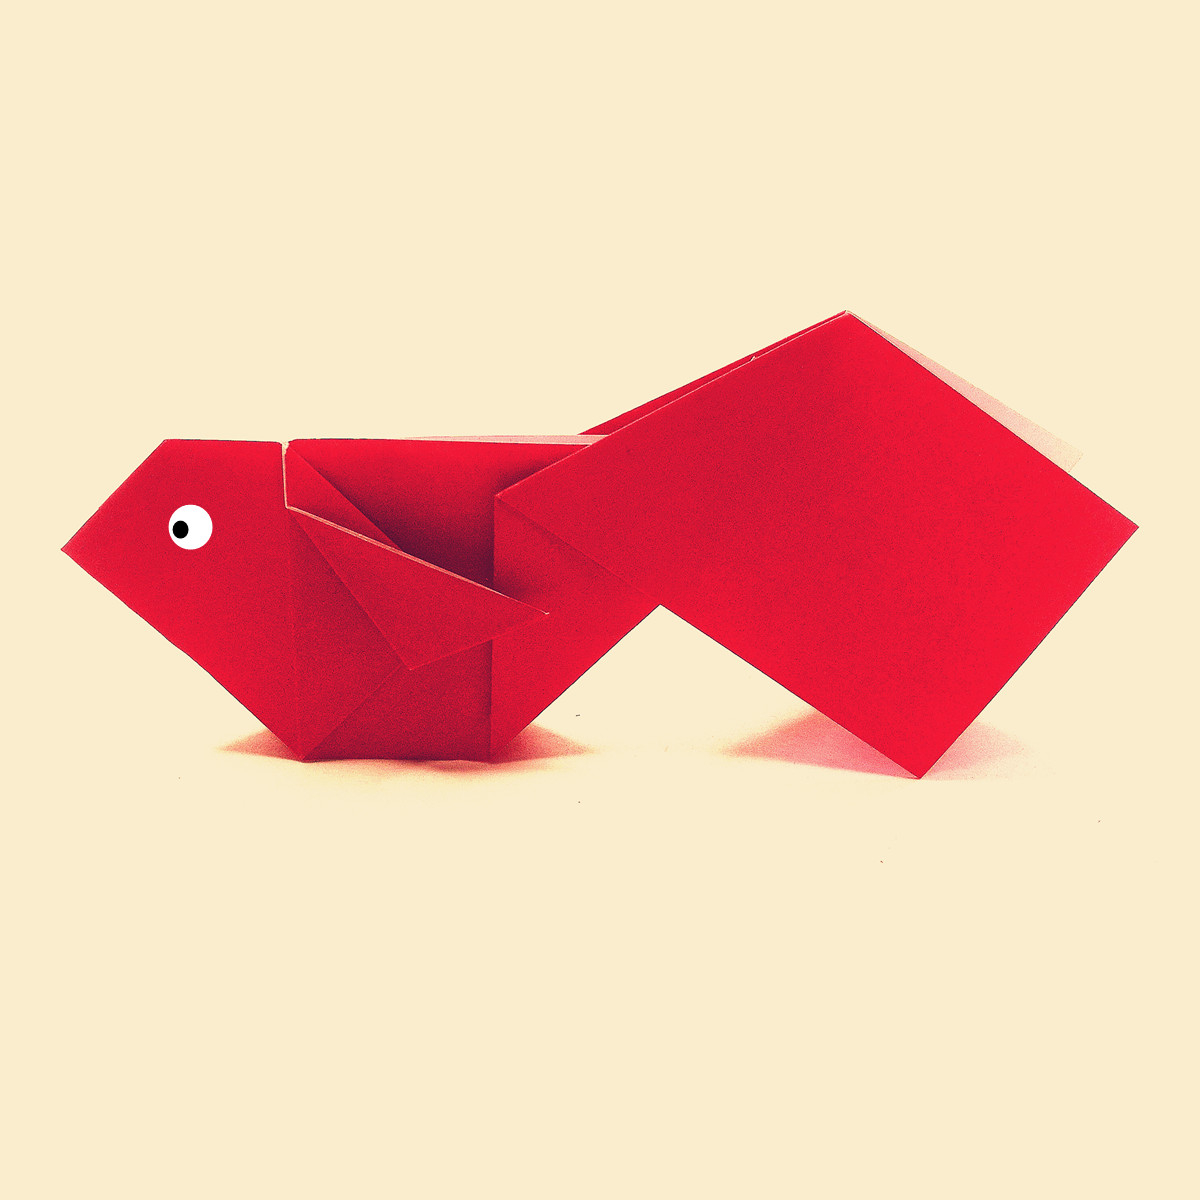 Origami Tank Instructions How To Make An Origami Goldfish Origami Goldfish Instructions